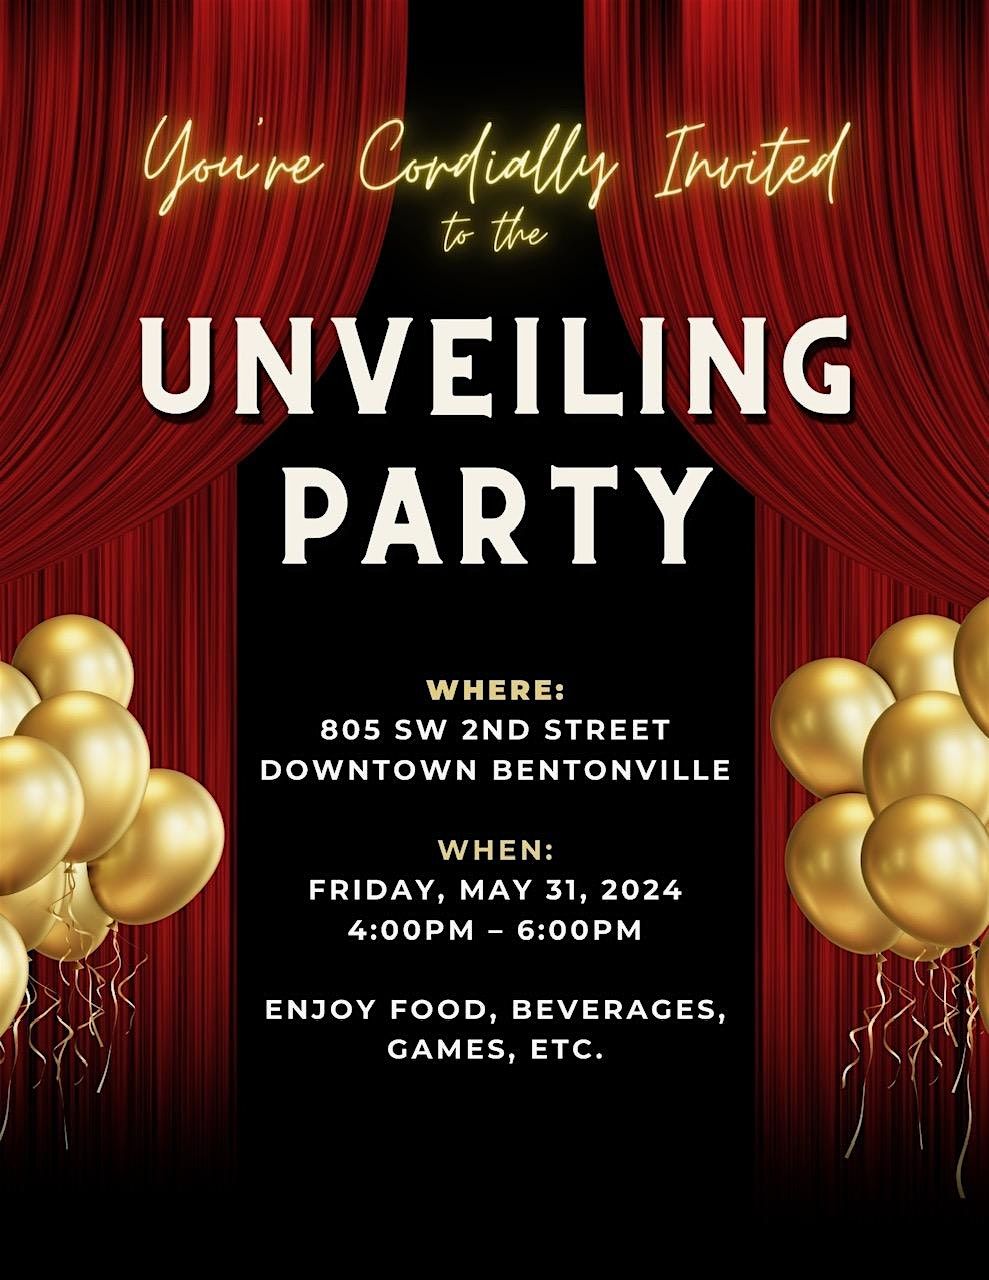 Downtown Bentonville Property  Unveiling Party